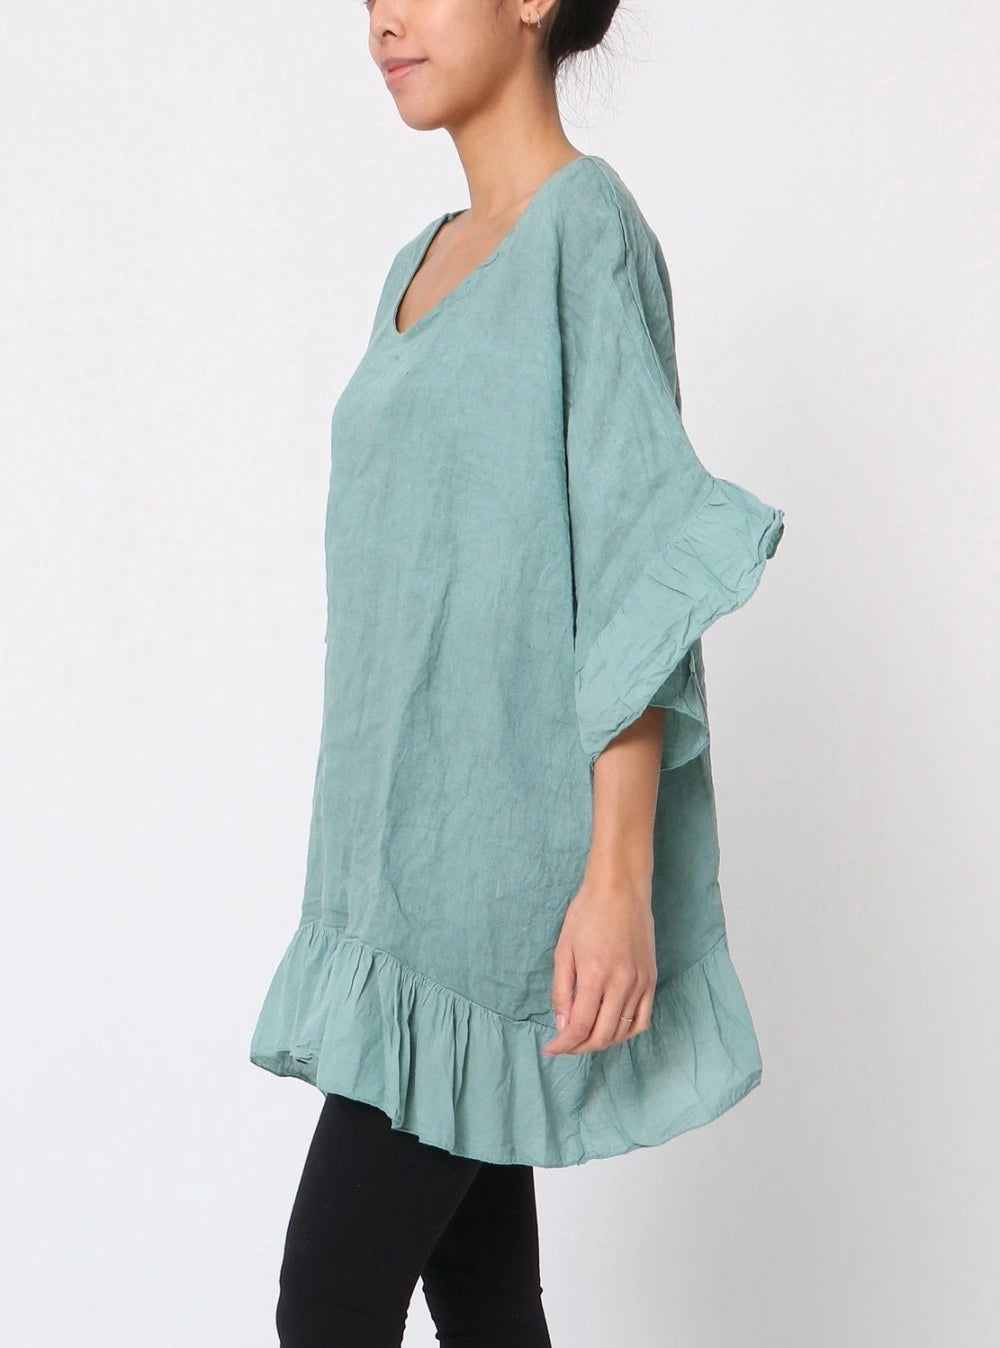 Over-size breezy tunic with ruffled edges